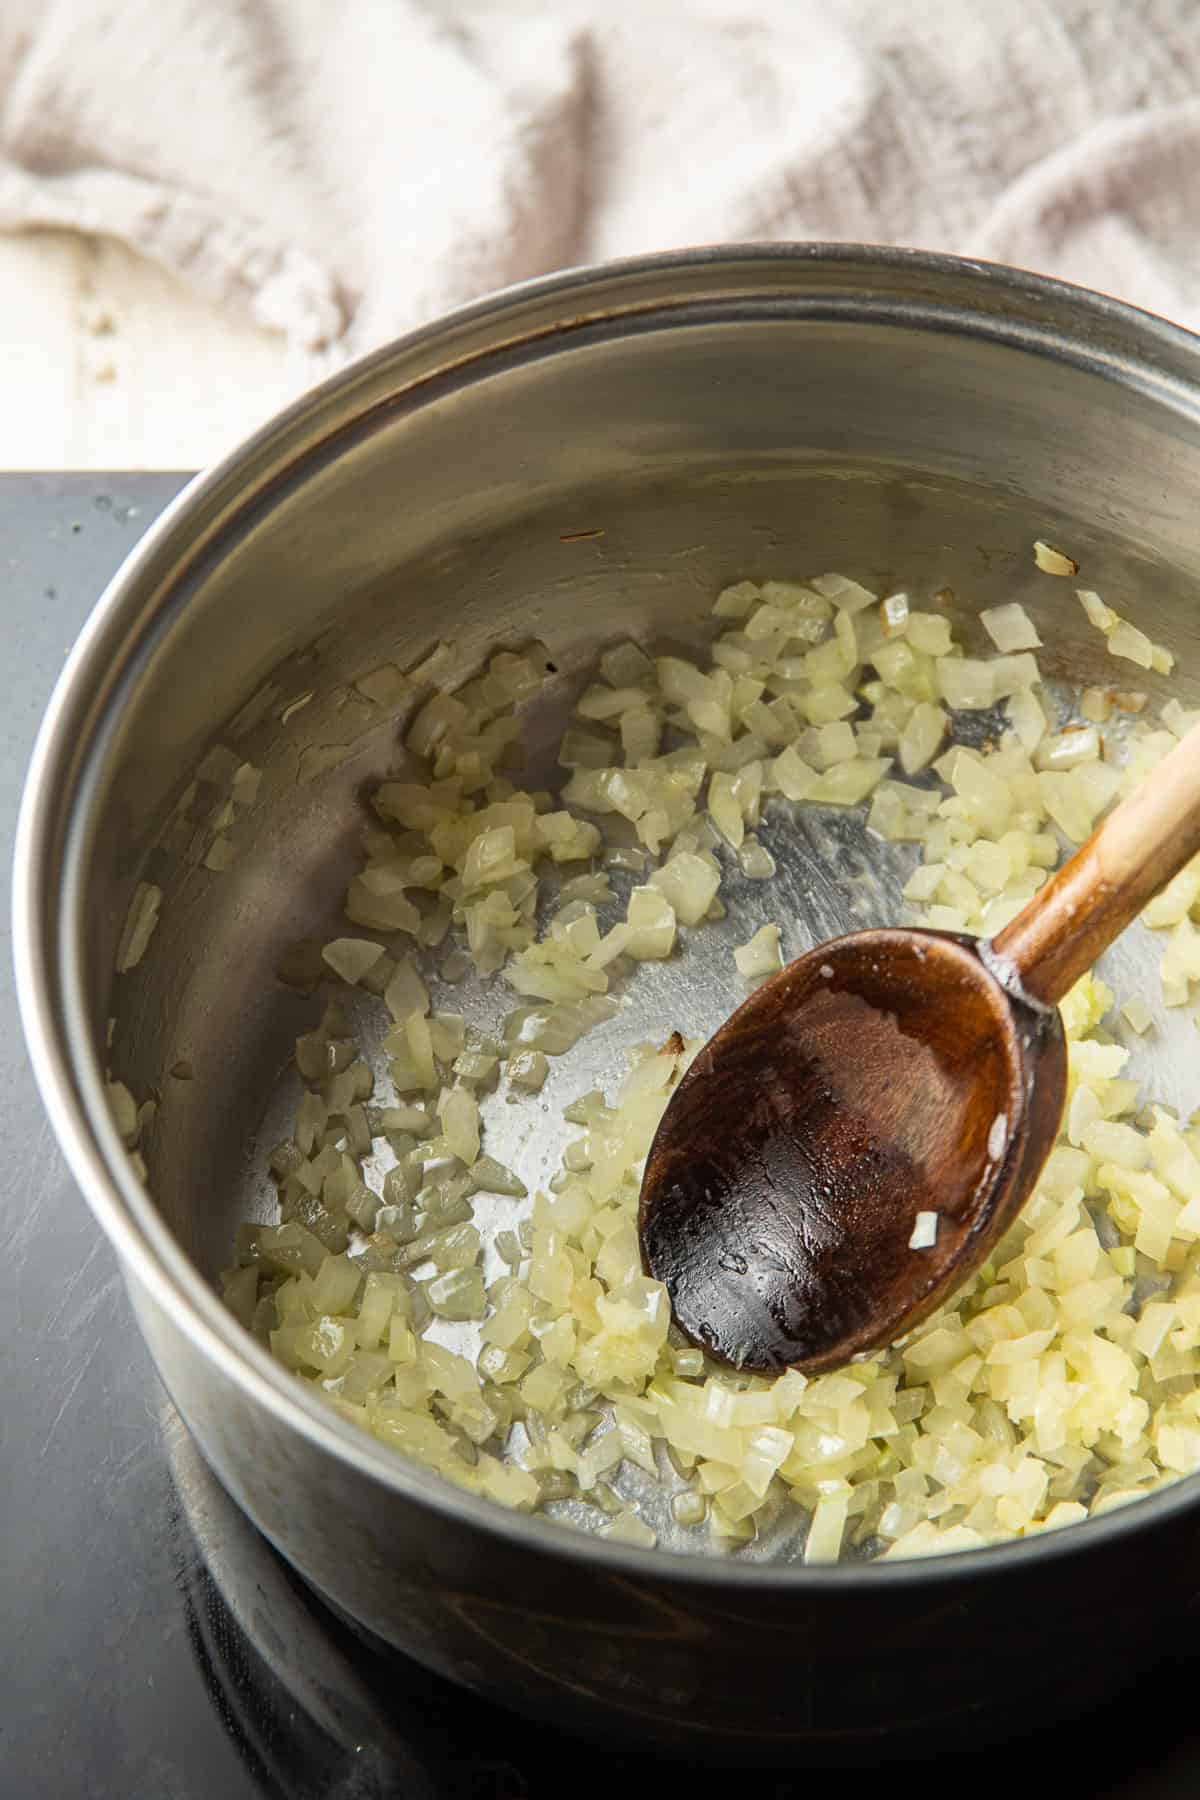 Onions cooking in a saucepan with a wooden spoon.